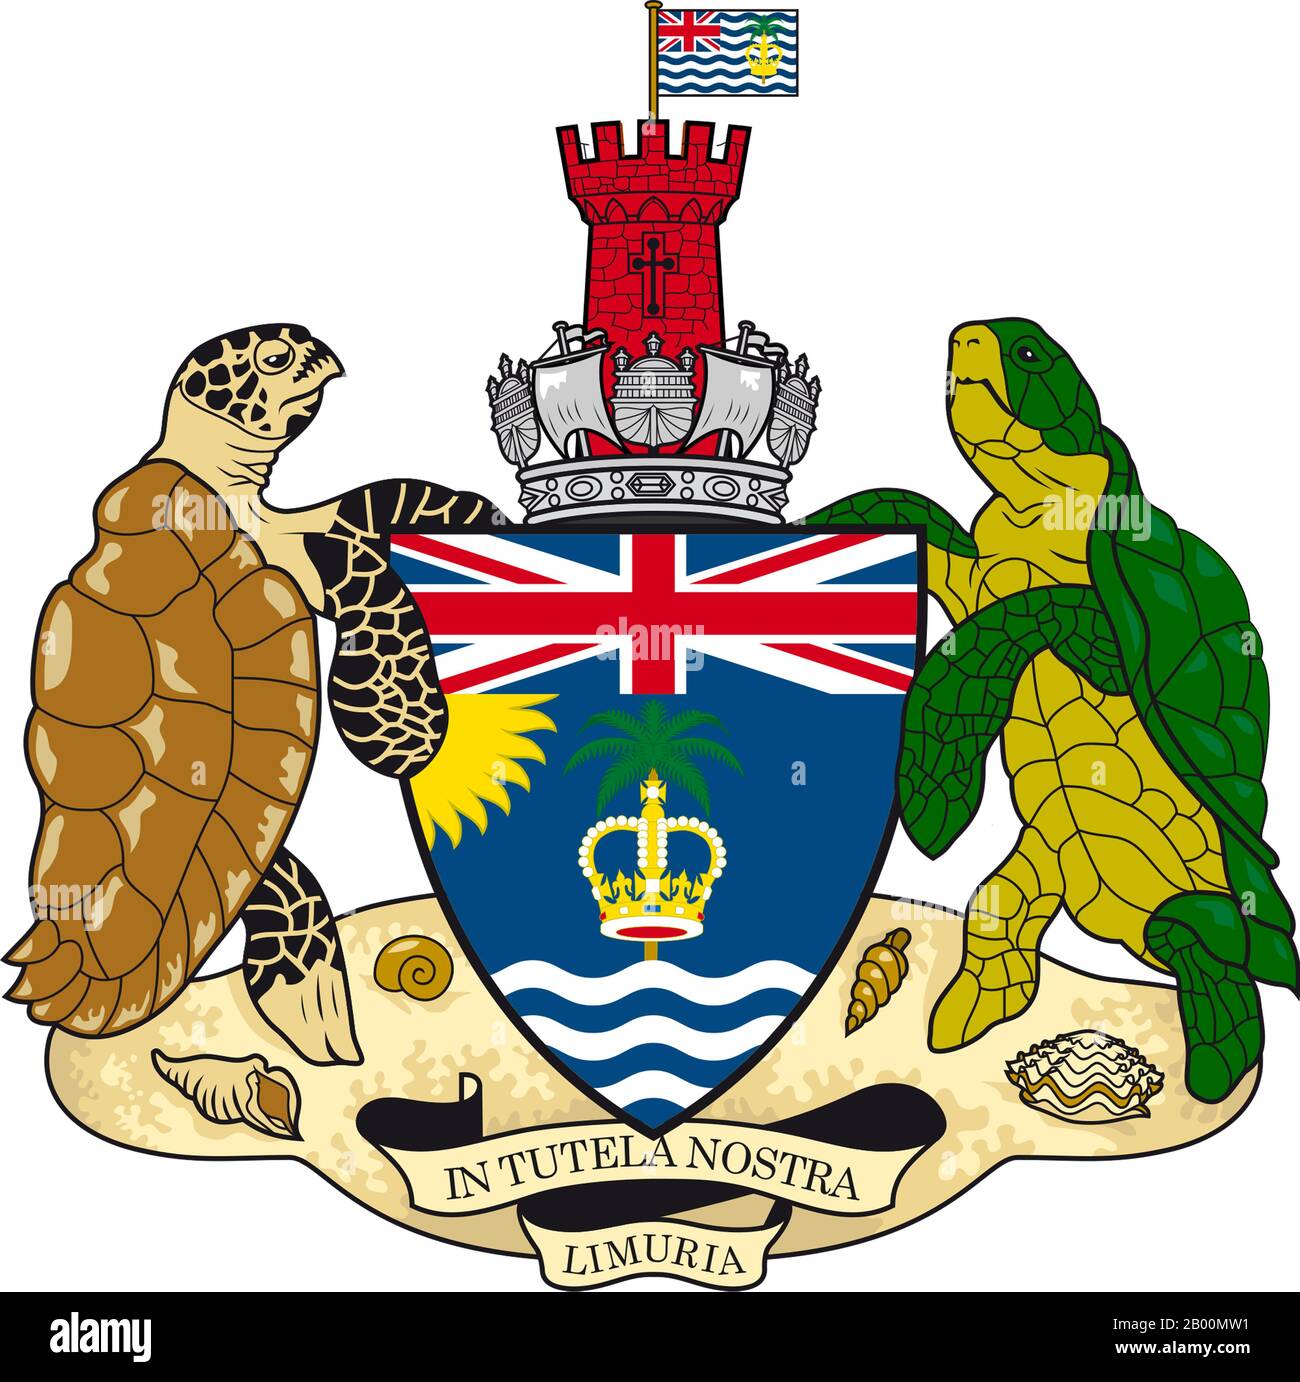 BIOT (British Indian Ocean Territory): BIOT Coat of Arms (CC BY-SA 3.0. by Demidow).  The British Indian Ocean Territory (BIOT) or Chagos Islands (formerly the Oil Islands) is an overseas territory of the United Kingdom situated in the Indian Ocean, halfway between Africa and Indonesia. The territory comprises a group of seven atolls comprising more than 60 individual islands, situated some 500 kilometres (310 mi) due south of the Maldives archipelago. The largest island is Diego Garcia (area 44 km squared), the site of a joint military facility of the United Kingdom and the United States. Stock Photo